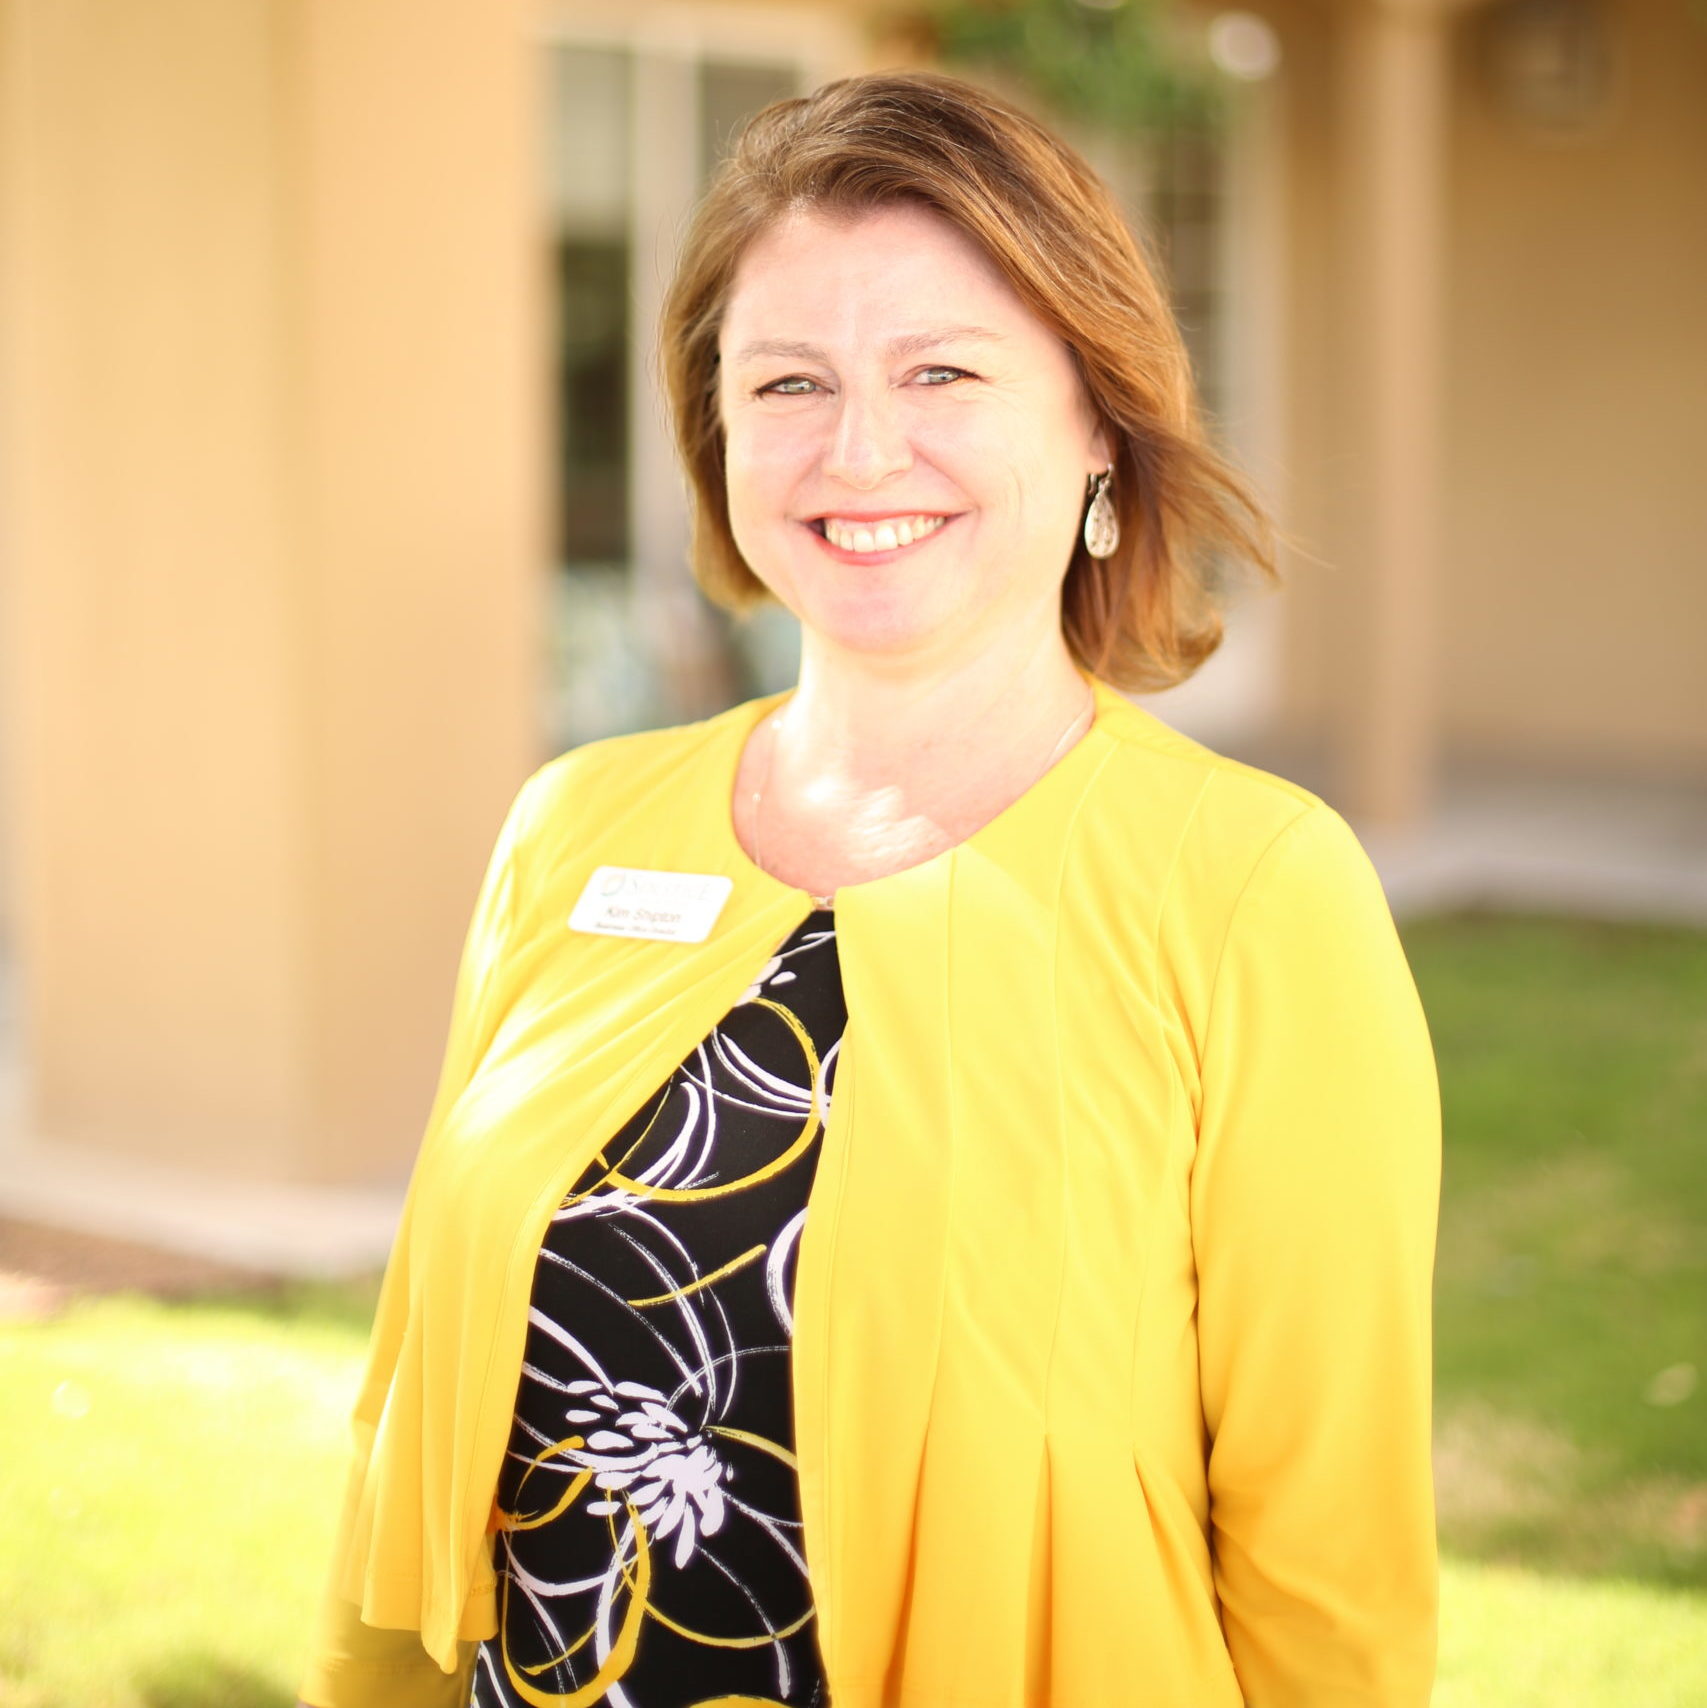 Kim Shipton, Business Office Director, Solstice at Las Cruces